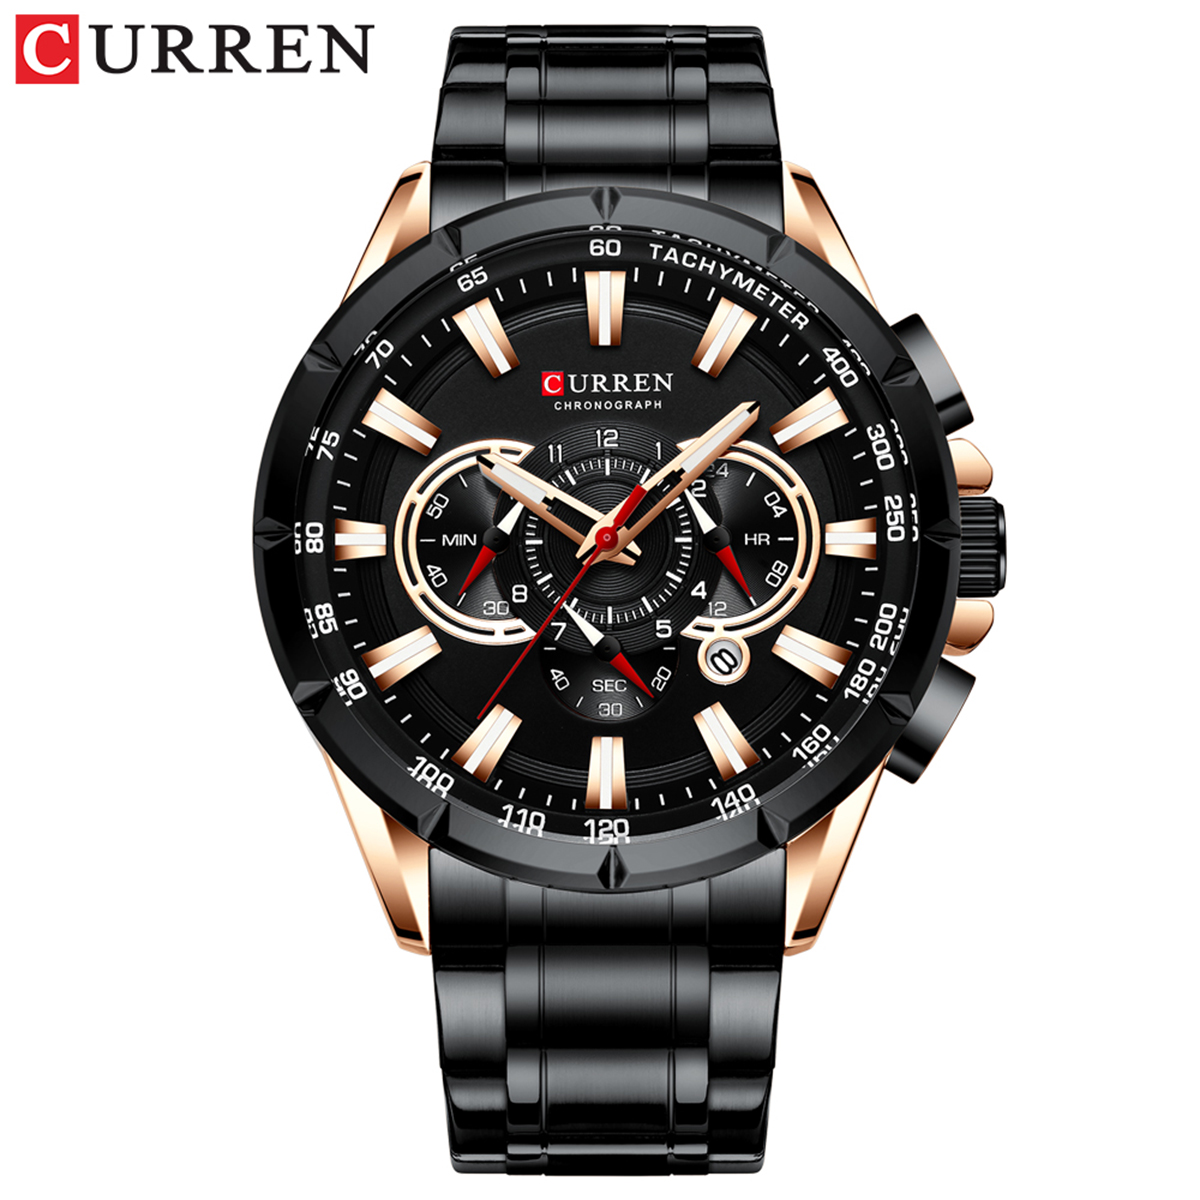 CURREN 8363 Watch for Male Men Quartz Man Wristwatch Watches with Stainless Steel Strap Band Three Sub-Dials Second Minute Microsecond Chronograph Date Calendar Indicator Waterproof Luminous Hands Wea - image 2 of 7